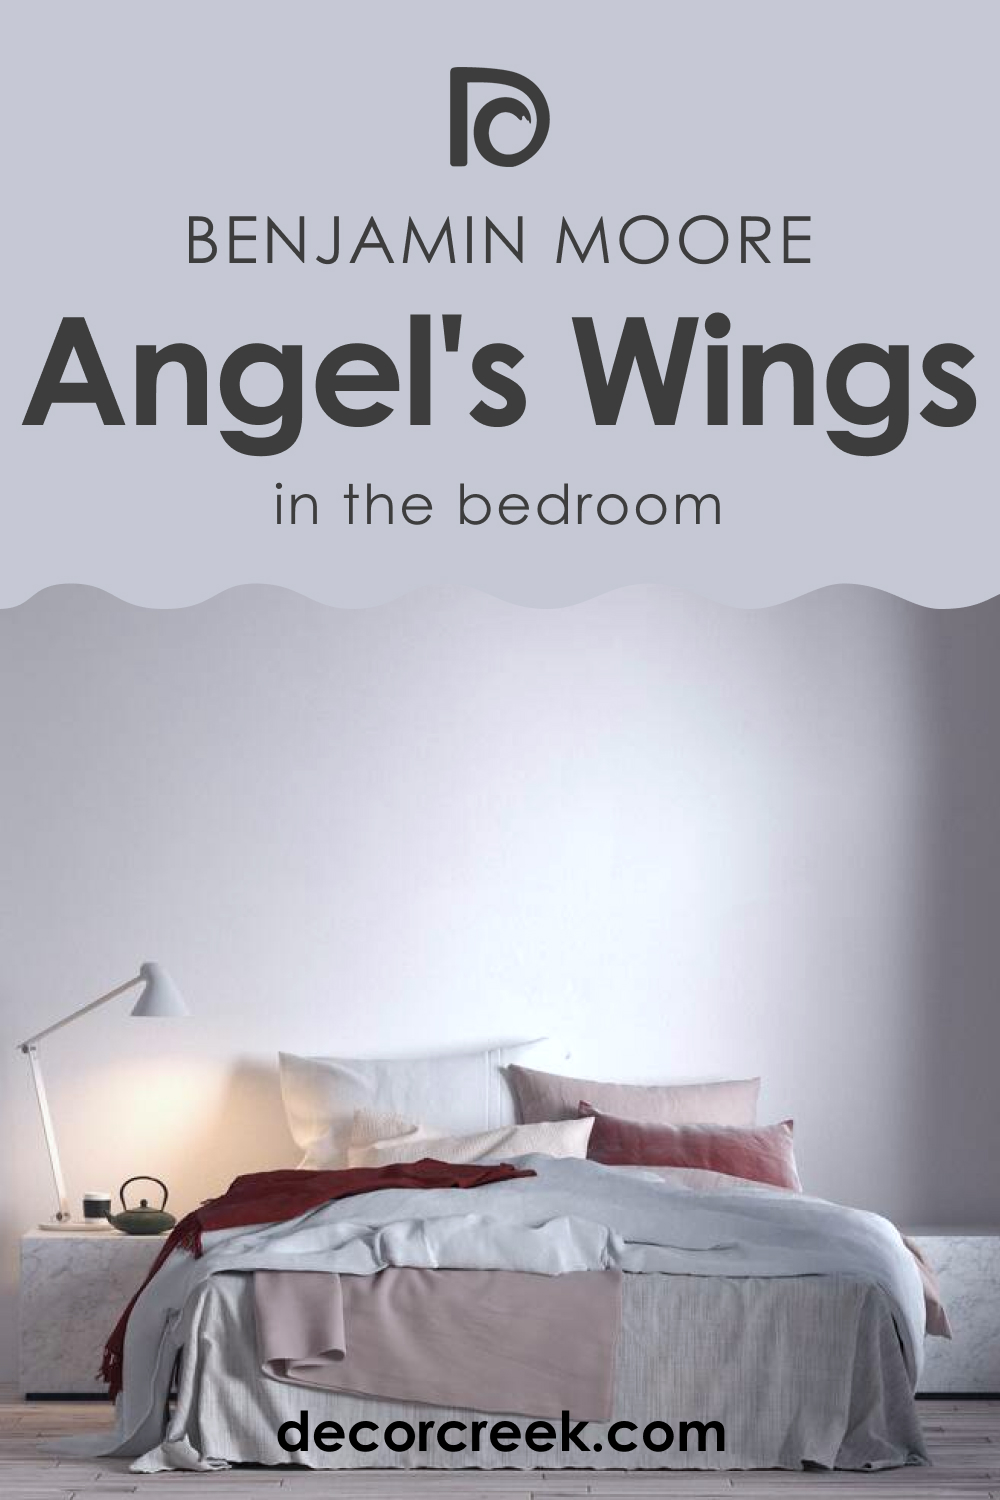 How to Use Angel's Wings 1423 in the Bedroom?